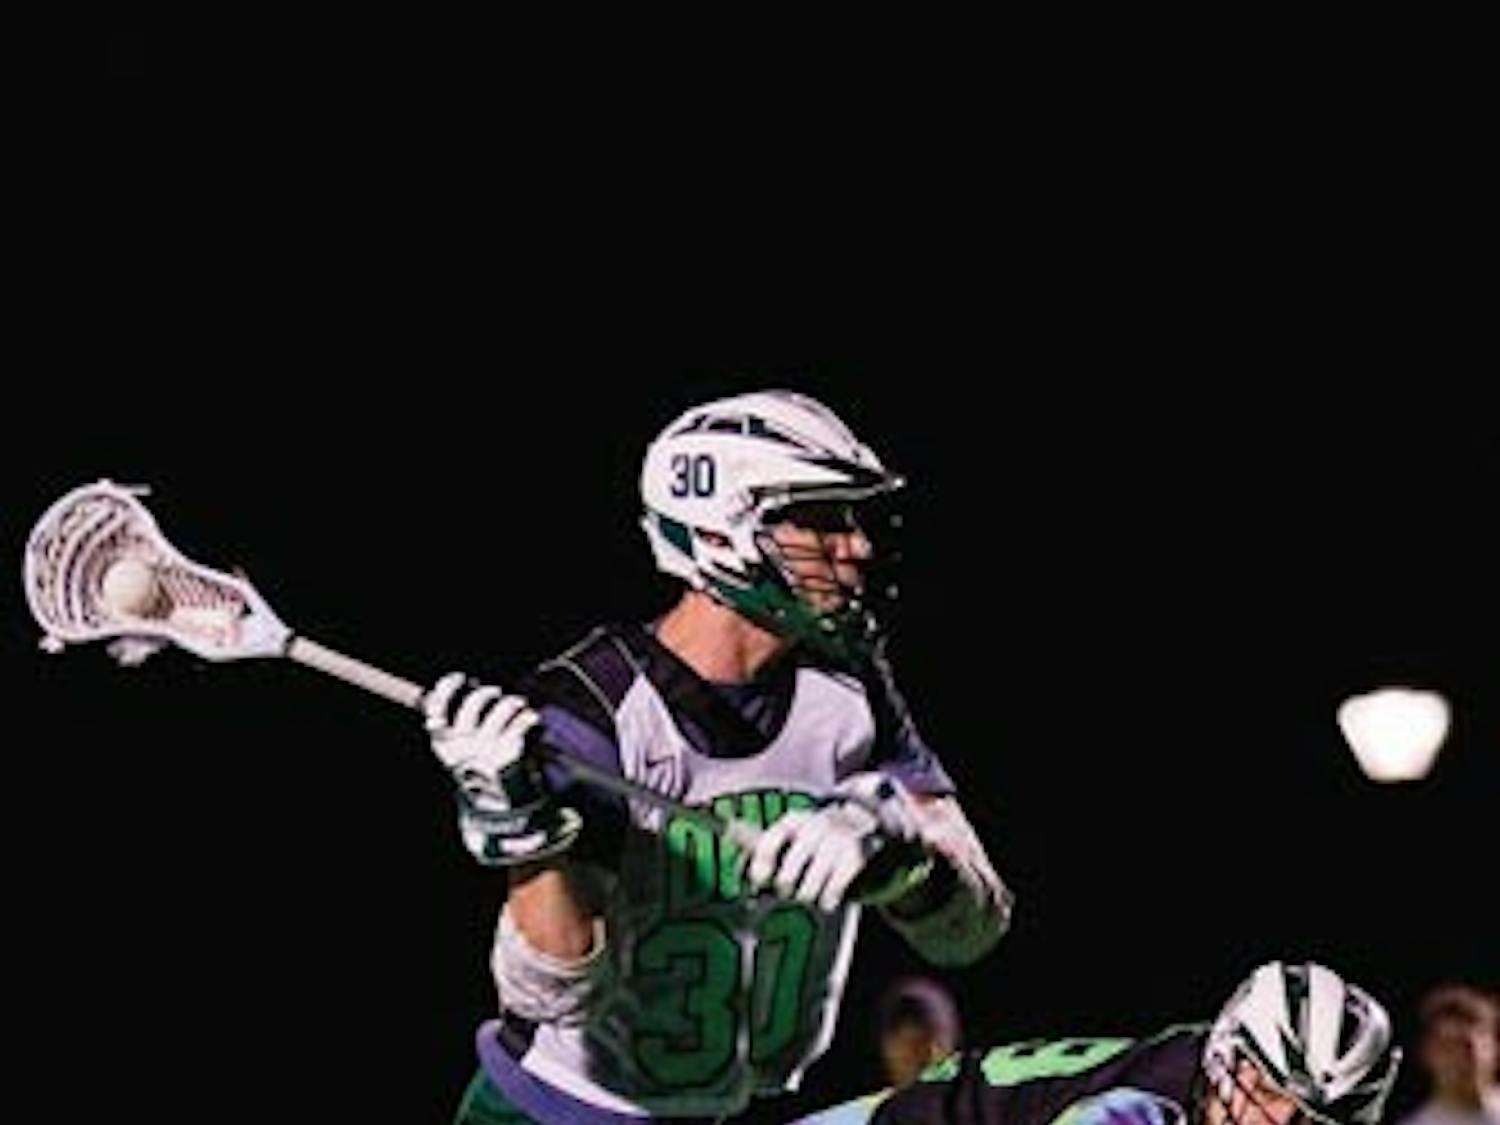 Club Sports: Lacrosse team on track for 1st playoff berth  